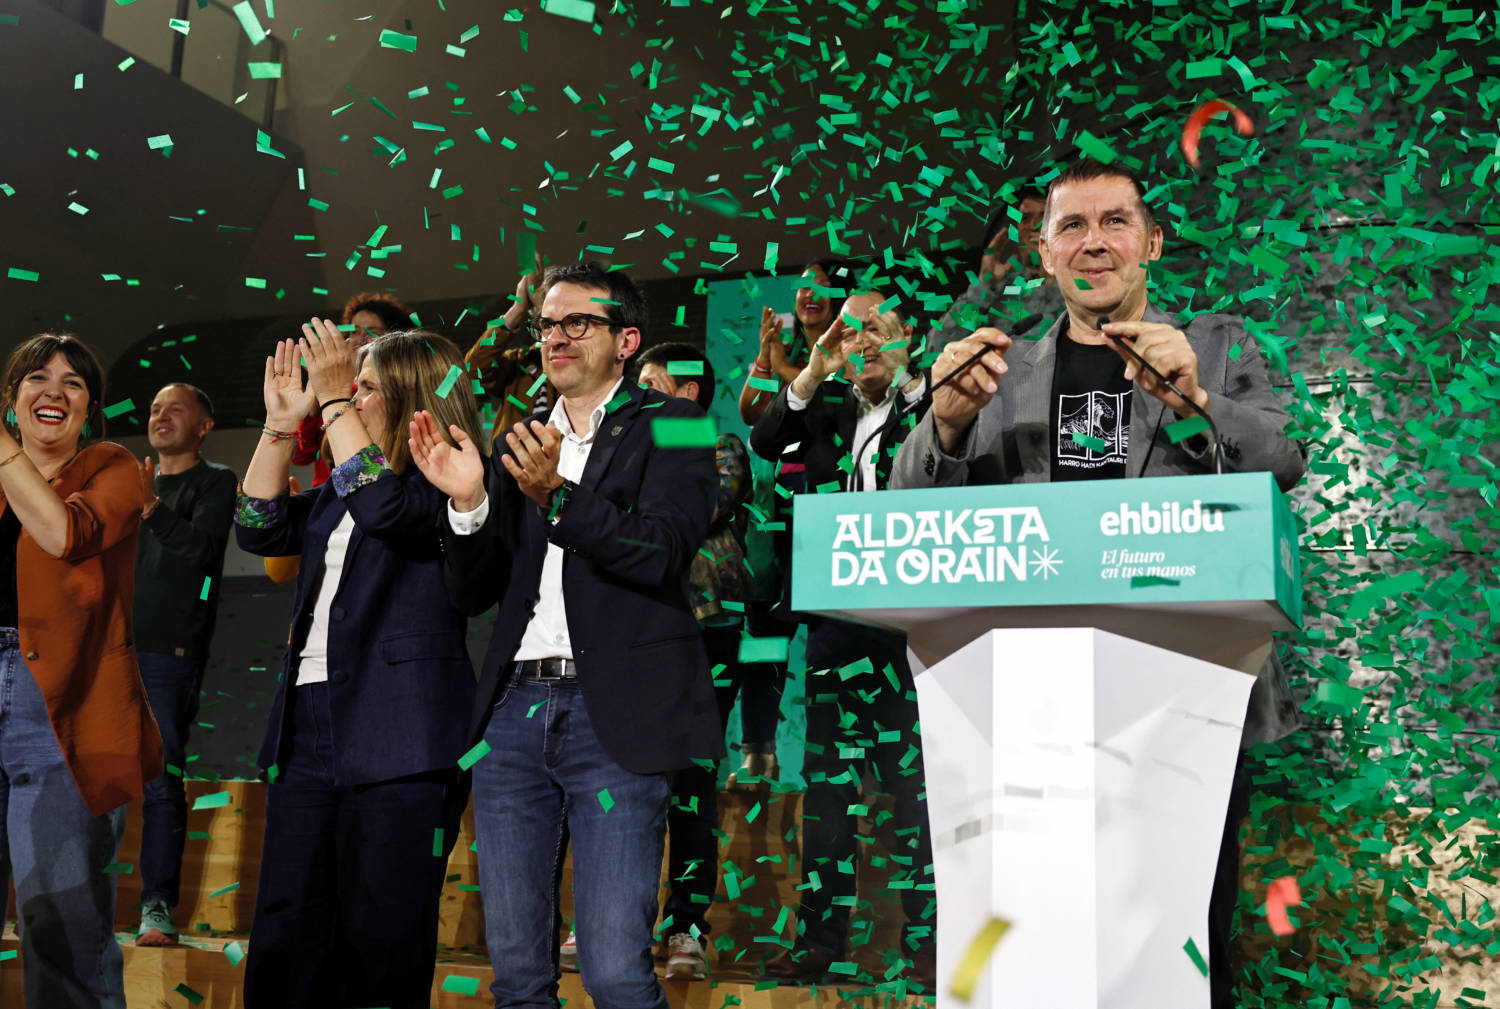 Left Wing Separatist Party Eh Bildu Celebrate Results In Regional Basque Country Elections, In Bilbao